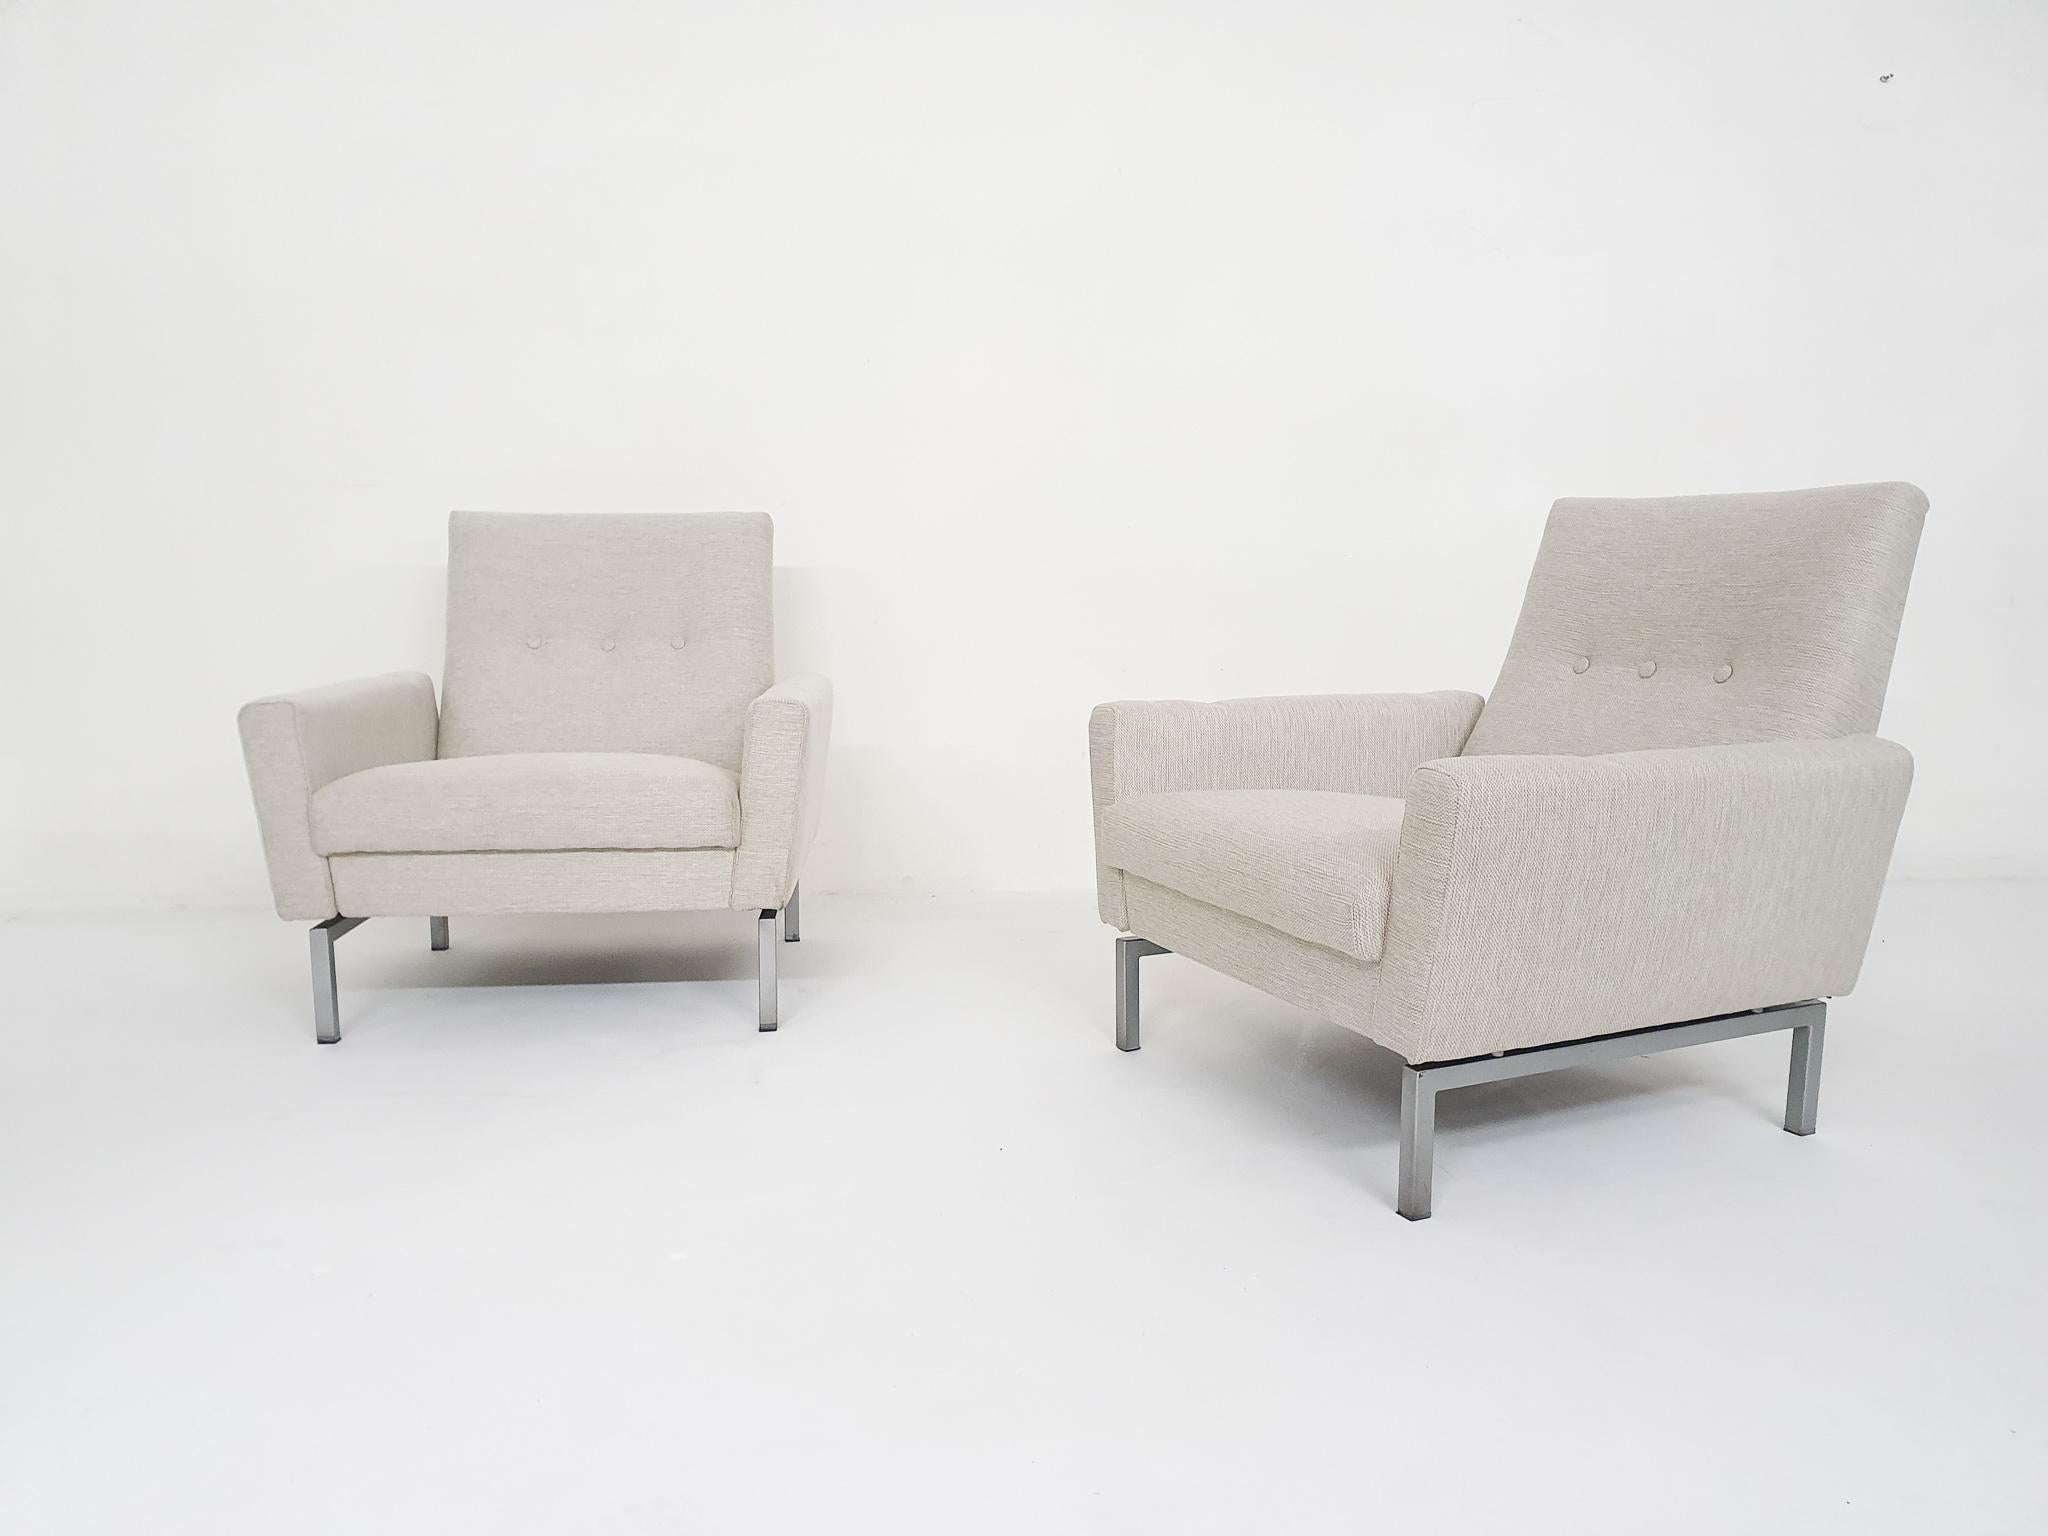 Mid-20th Century Set of Two Mid-Century Modern Lounge Chairs Attr. Artifort, The Netherlands 1950 For Sale